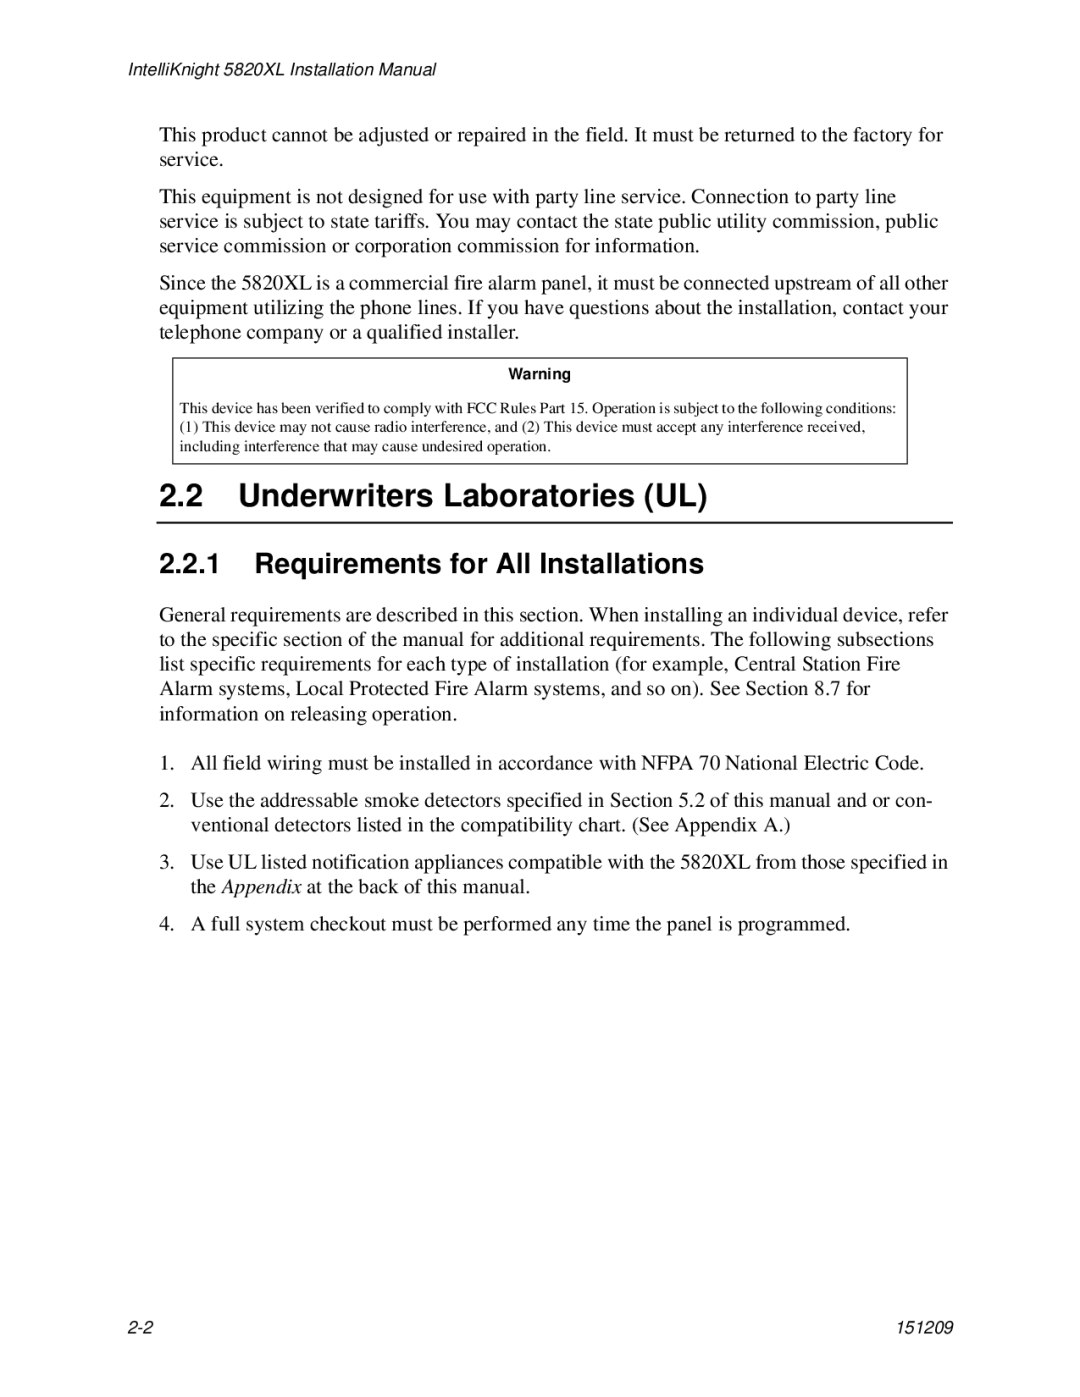 Honeywell 5820XL manual Underwriters Laboratories UL, Requirements for All Installations 